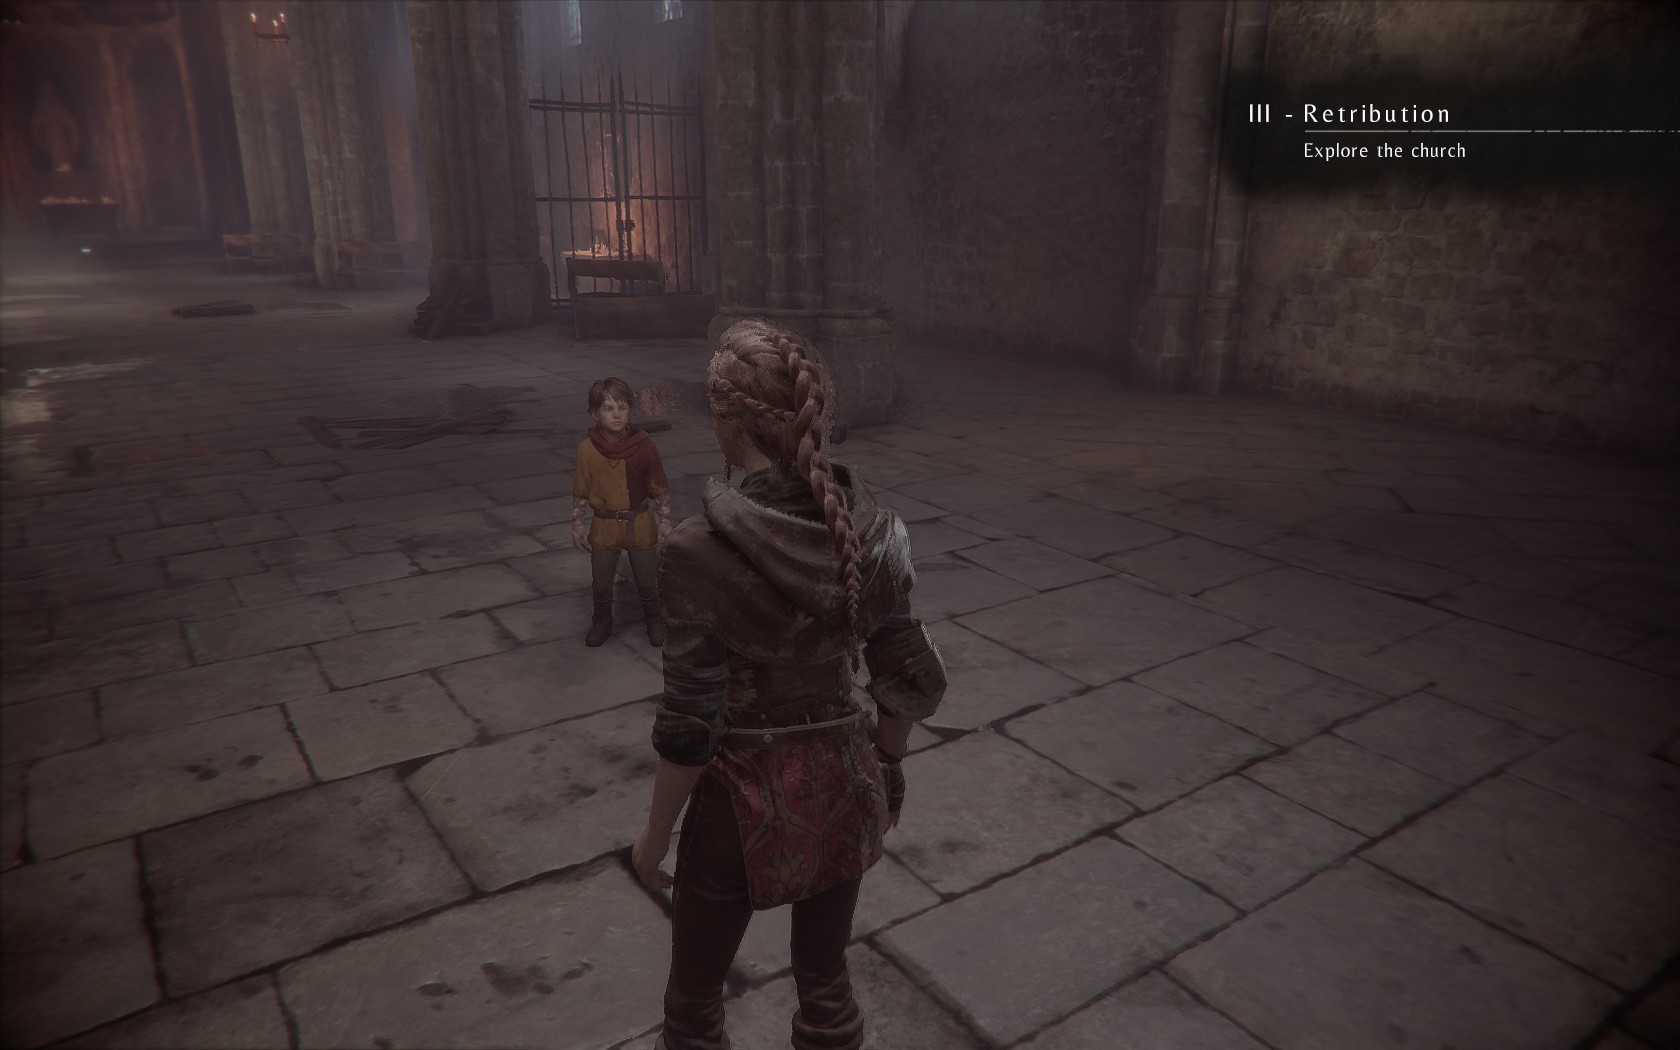 A Plague Tale: Innocence Review - A Tail and a Half - Fextralife